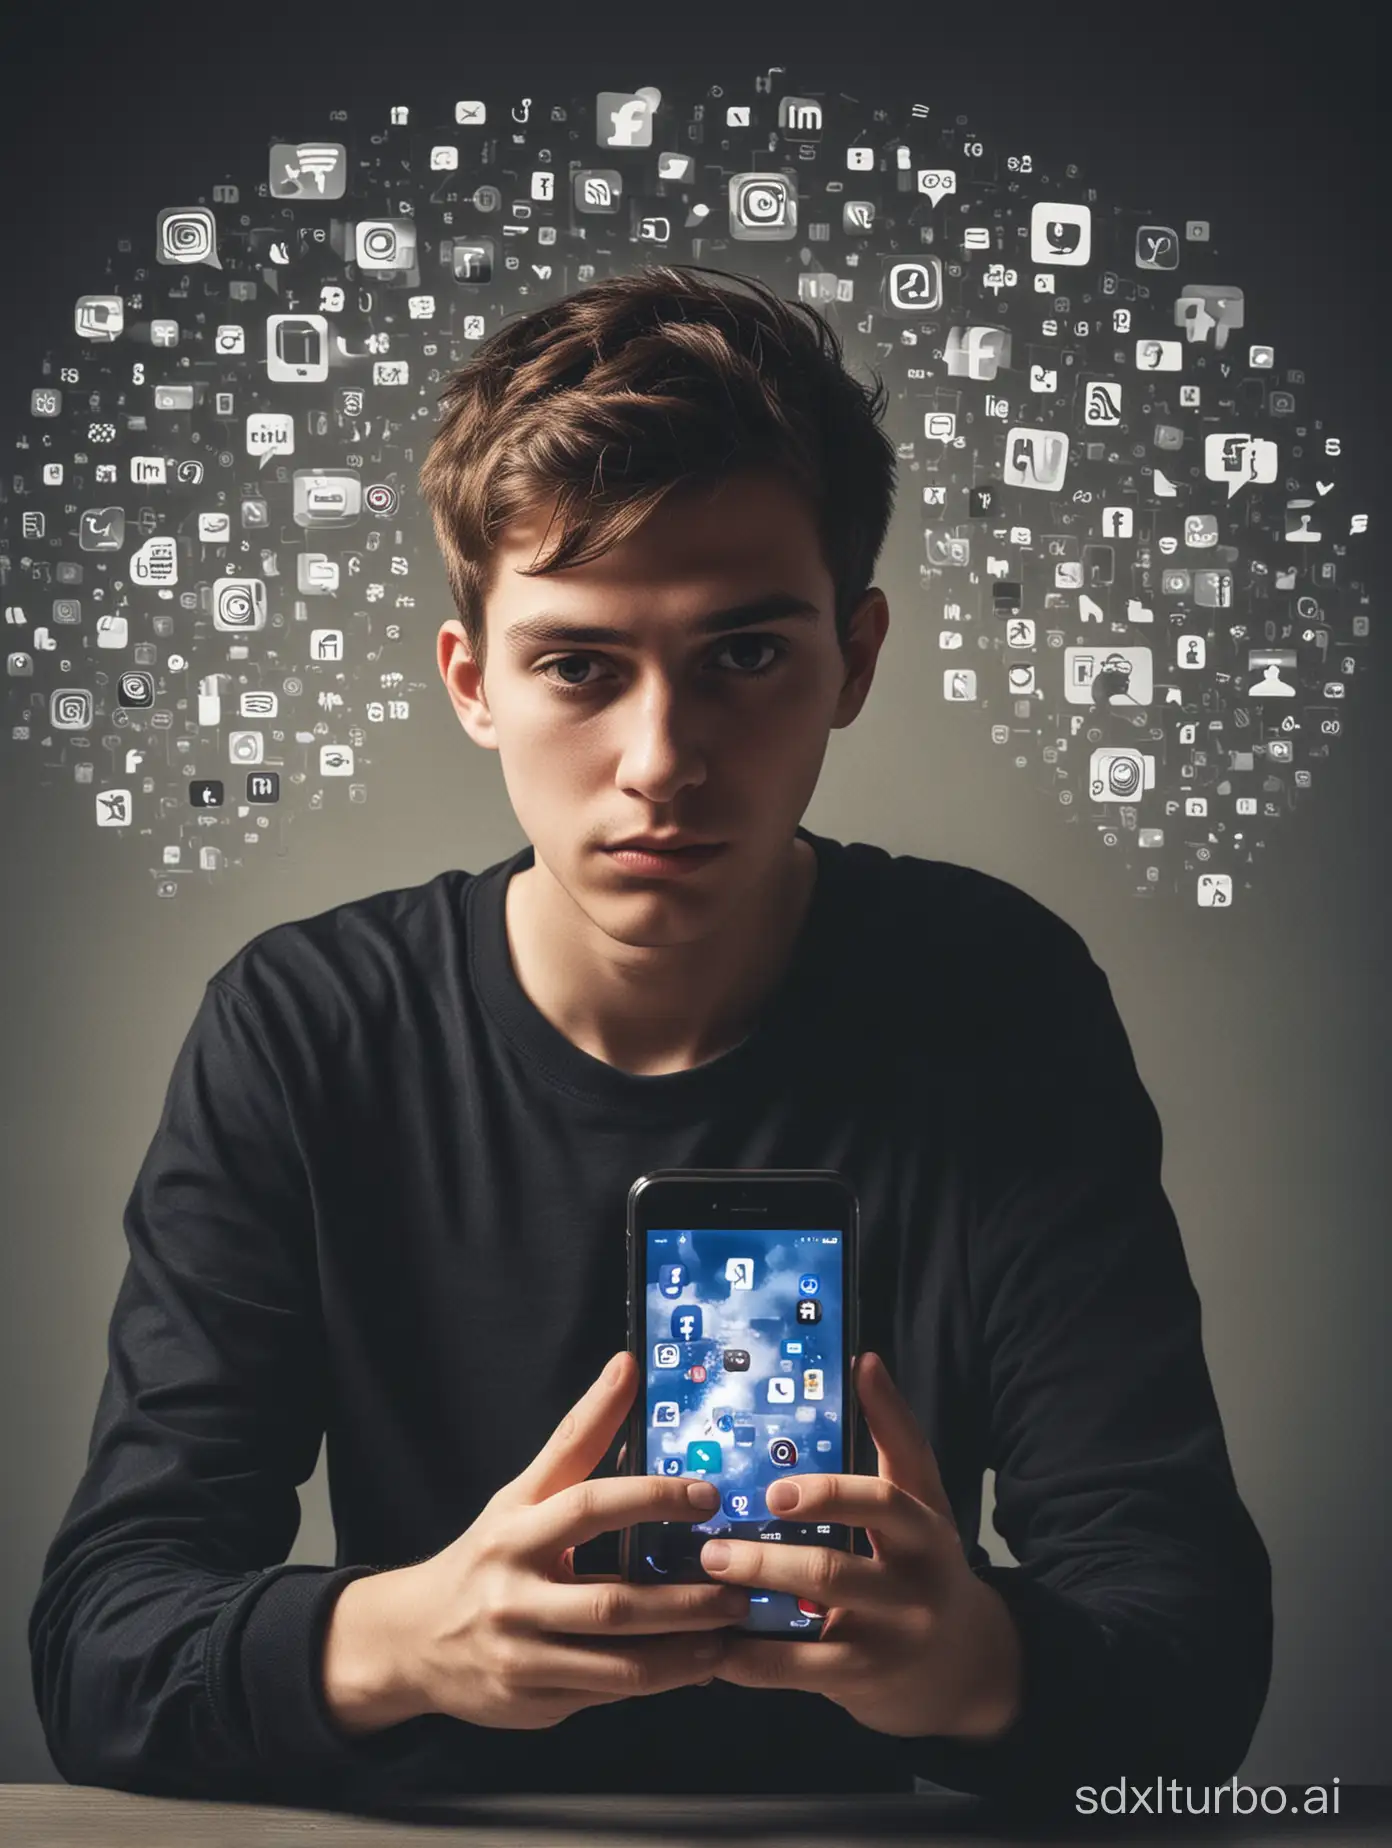 A young person whose family members are addicted to social media